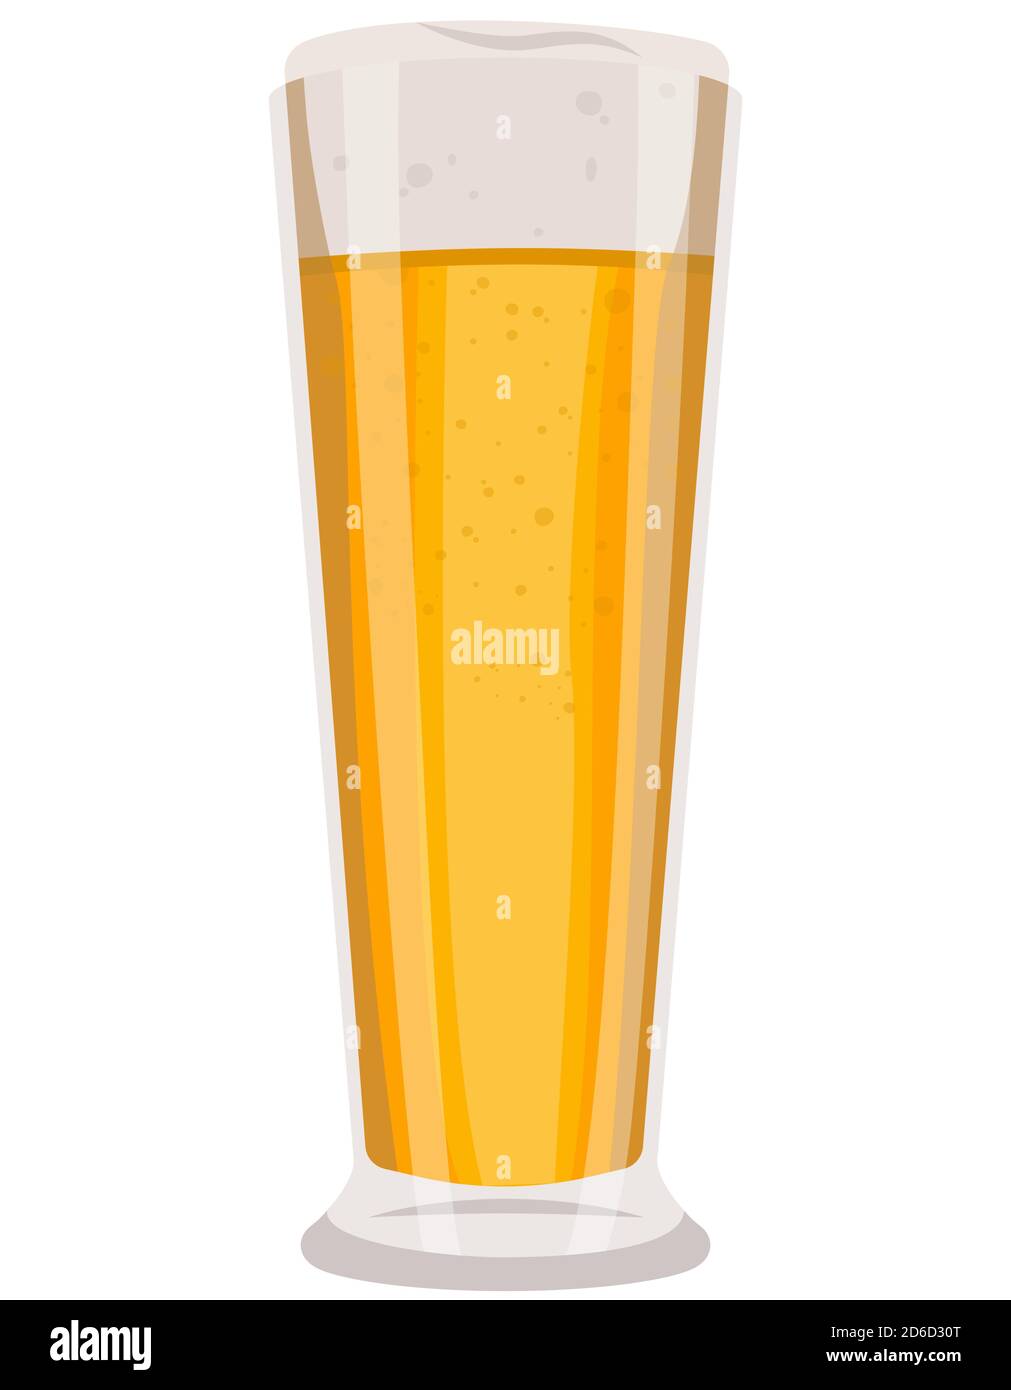 Full glass of beer. Single object isolated on white background. Stock Vector